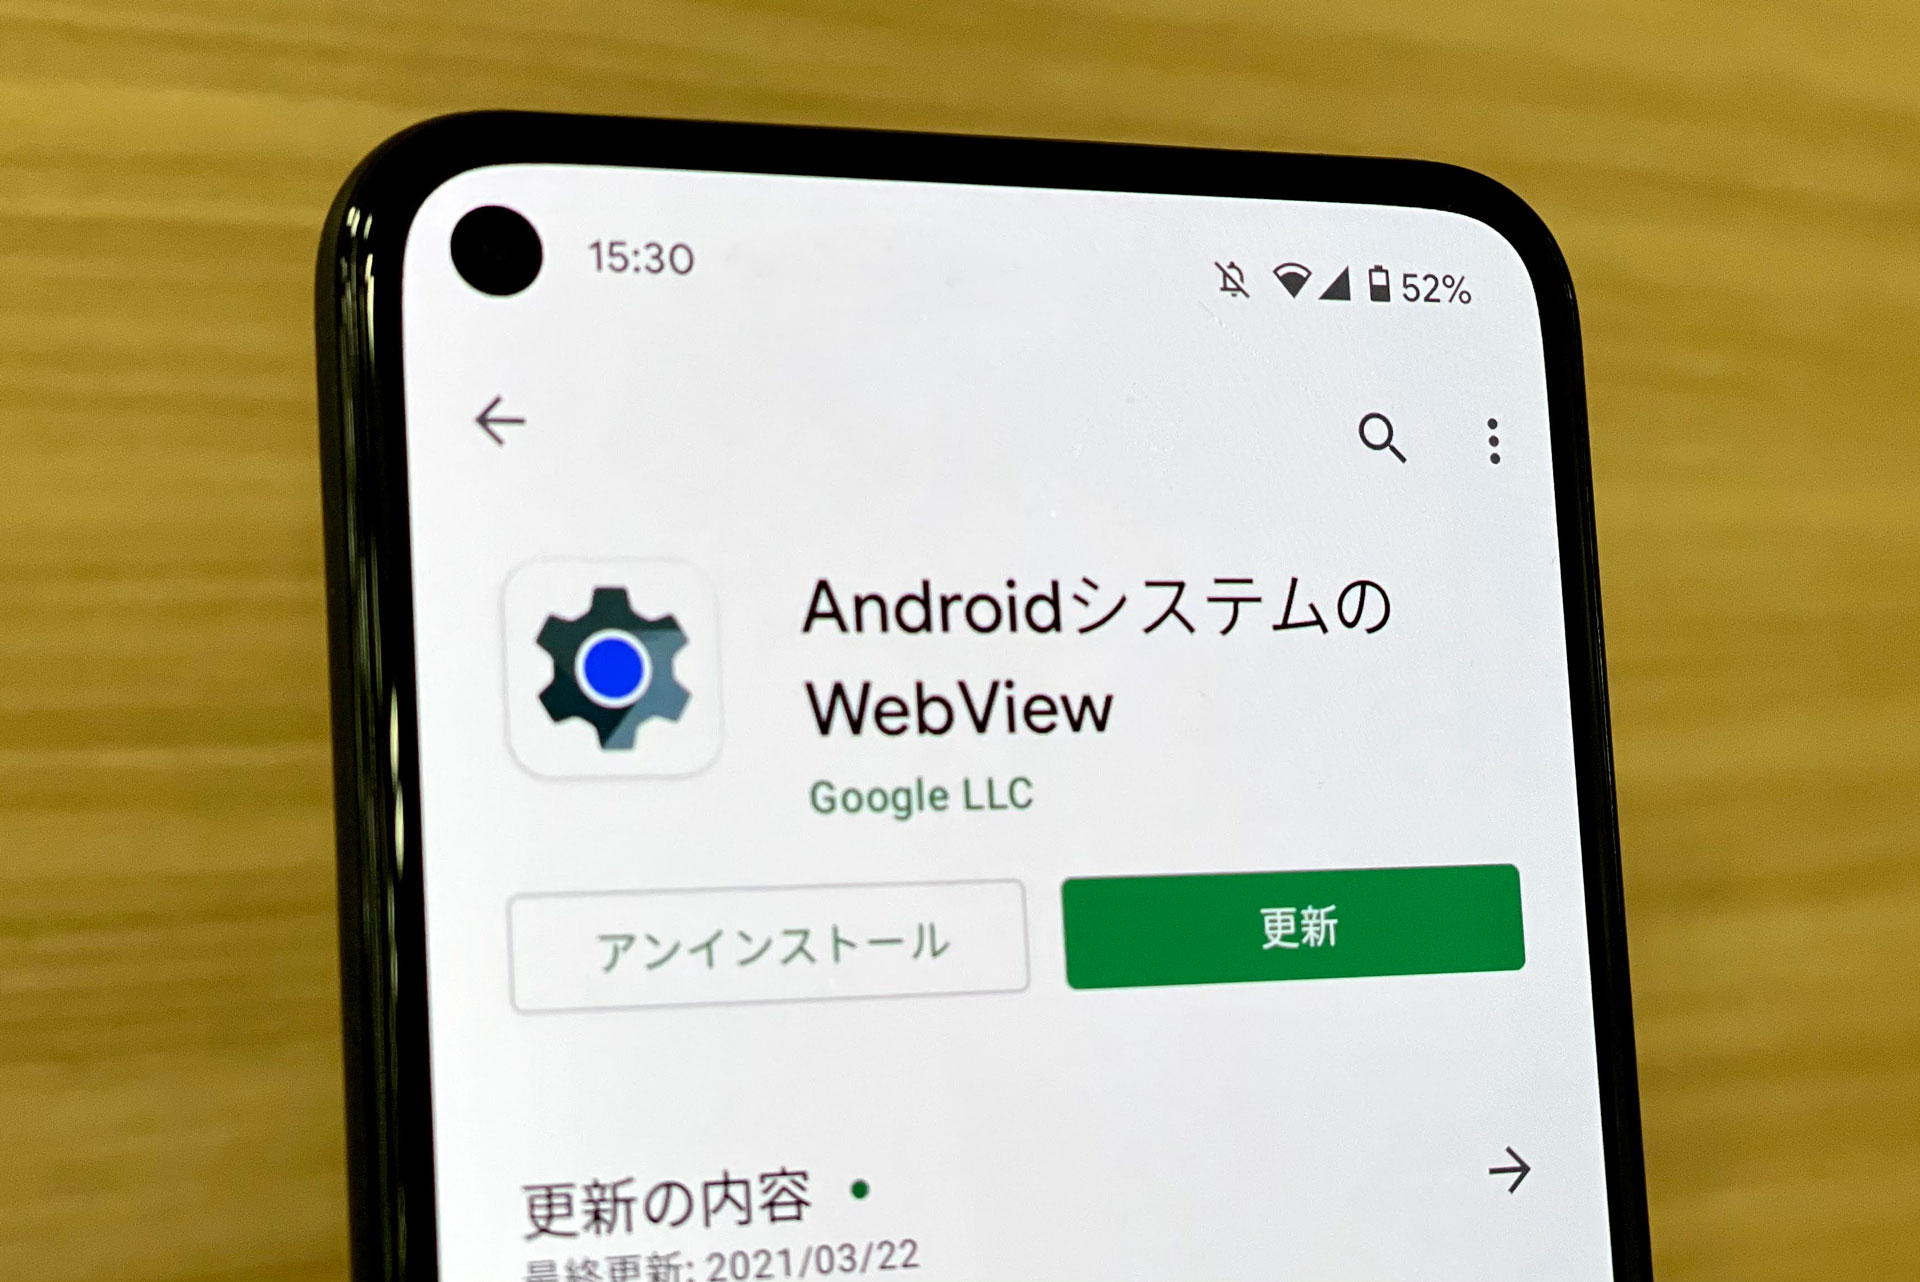 Androidの Webview 不具合 23日午後に解消する最新版公開 ケータイ Watch